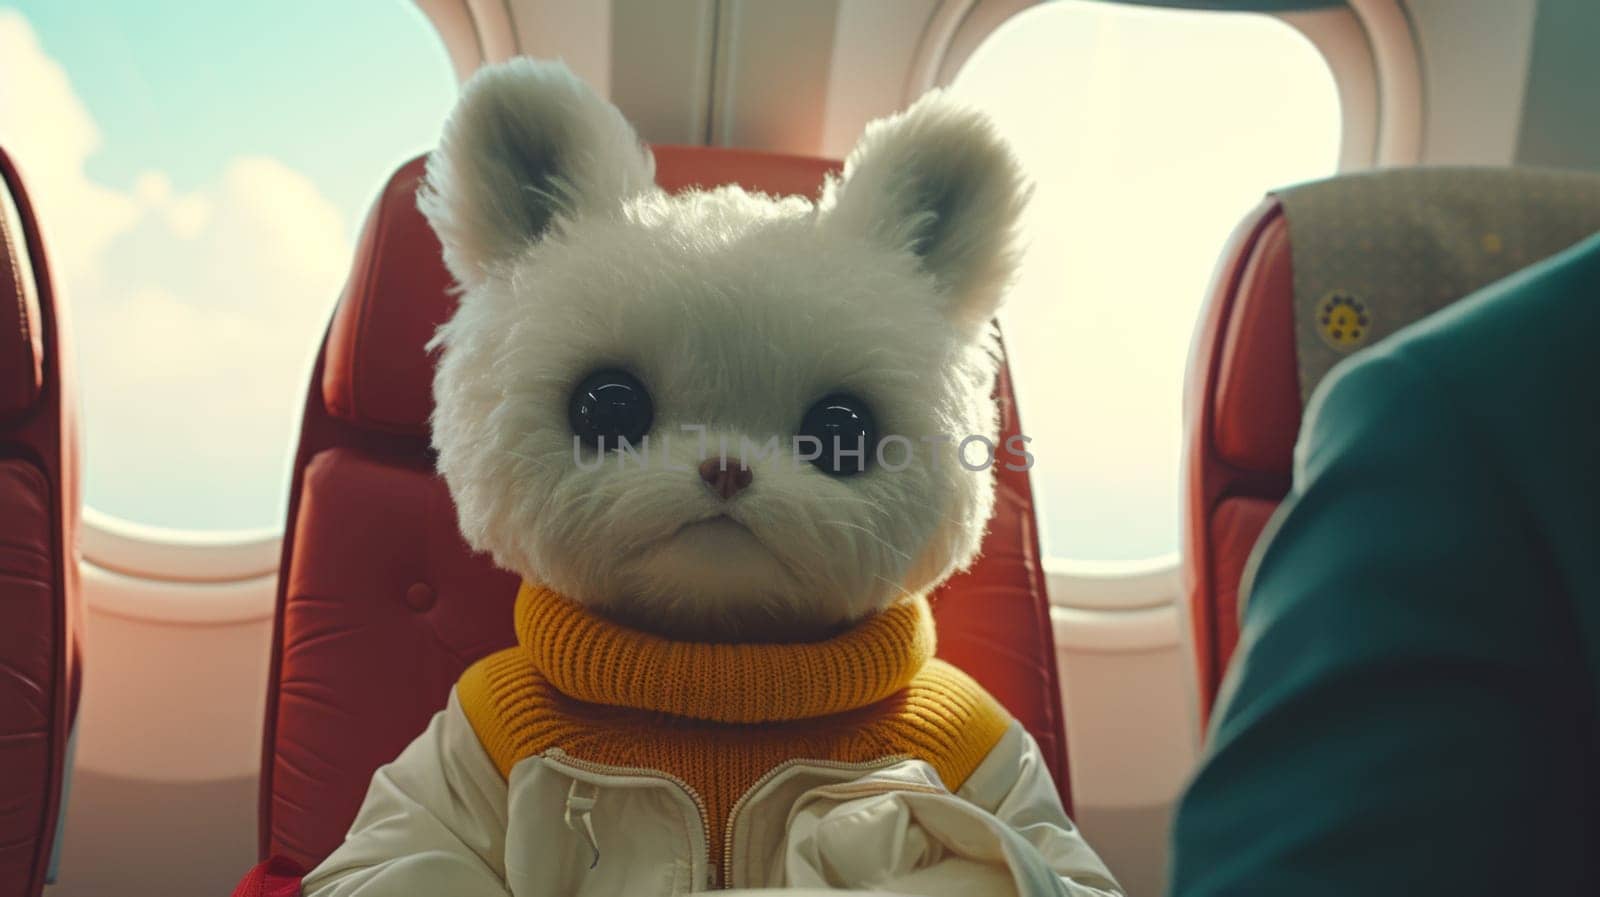 A stuffed animal wearing a sweater and sitting on an airplane, AI by starush